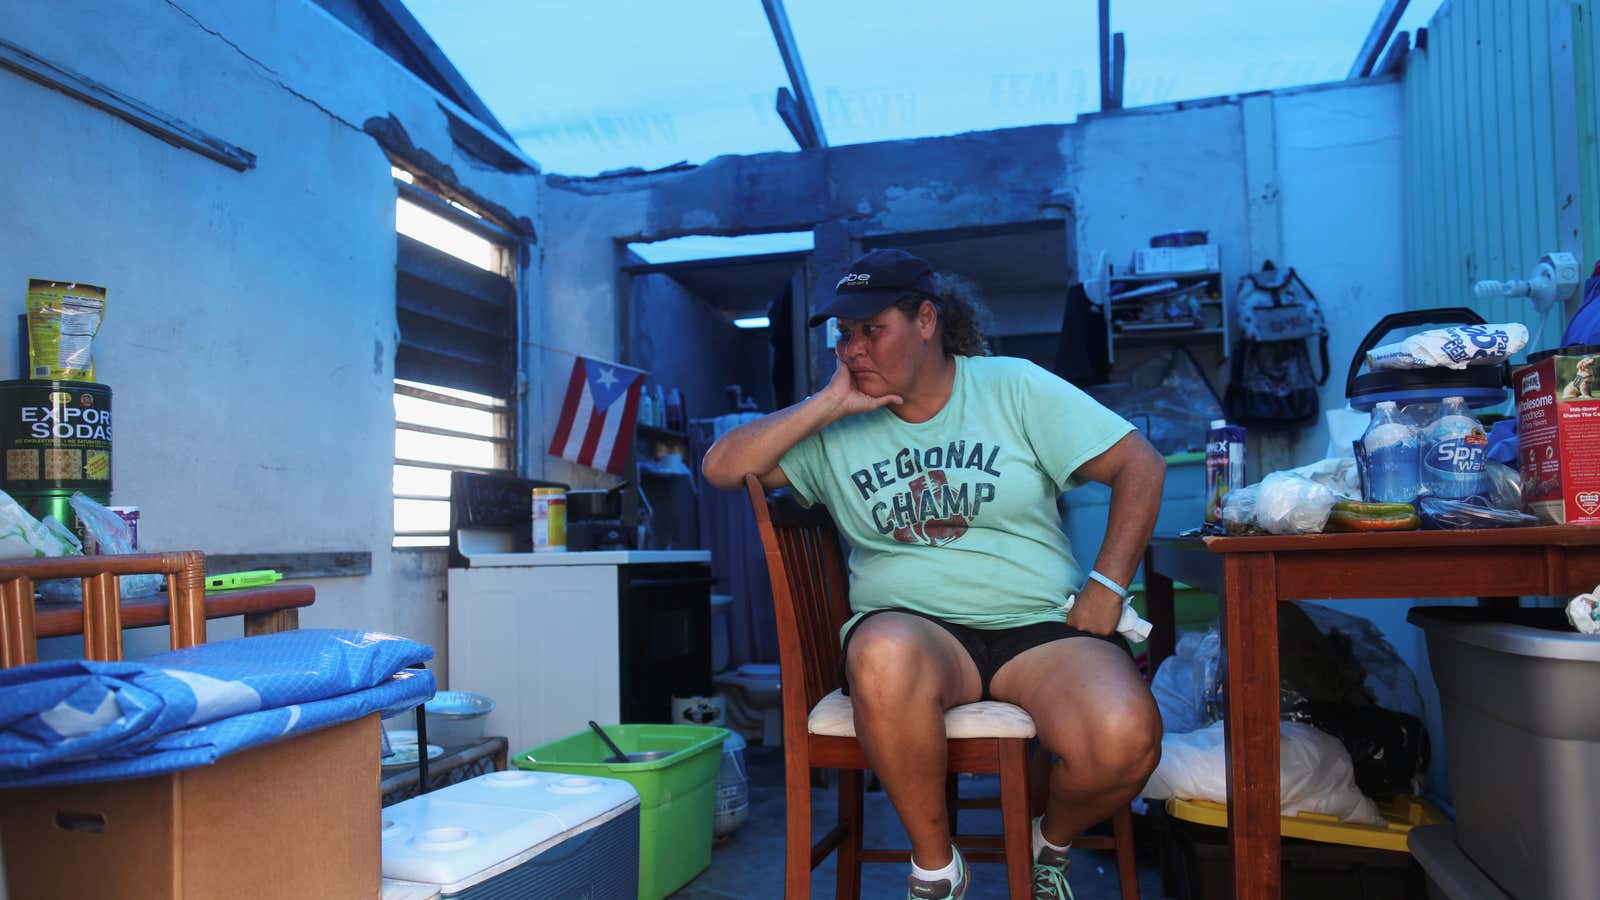 Jazmin Morales sits in her kitchen without power and with a plastic sheet replacing the roof after Hurricane Maria hit the island in September, in Yabucoa, Puerto Rico January 29, 2018.